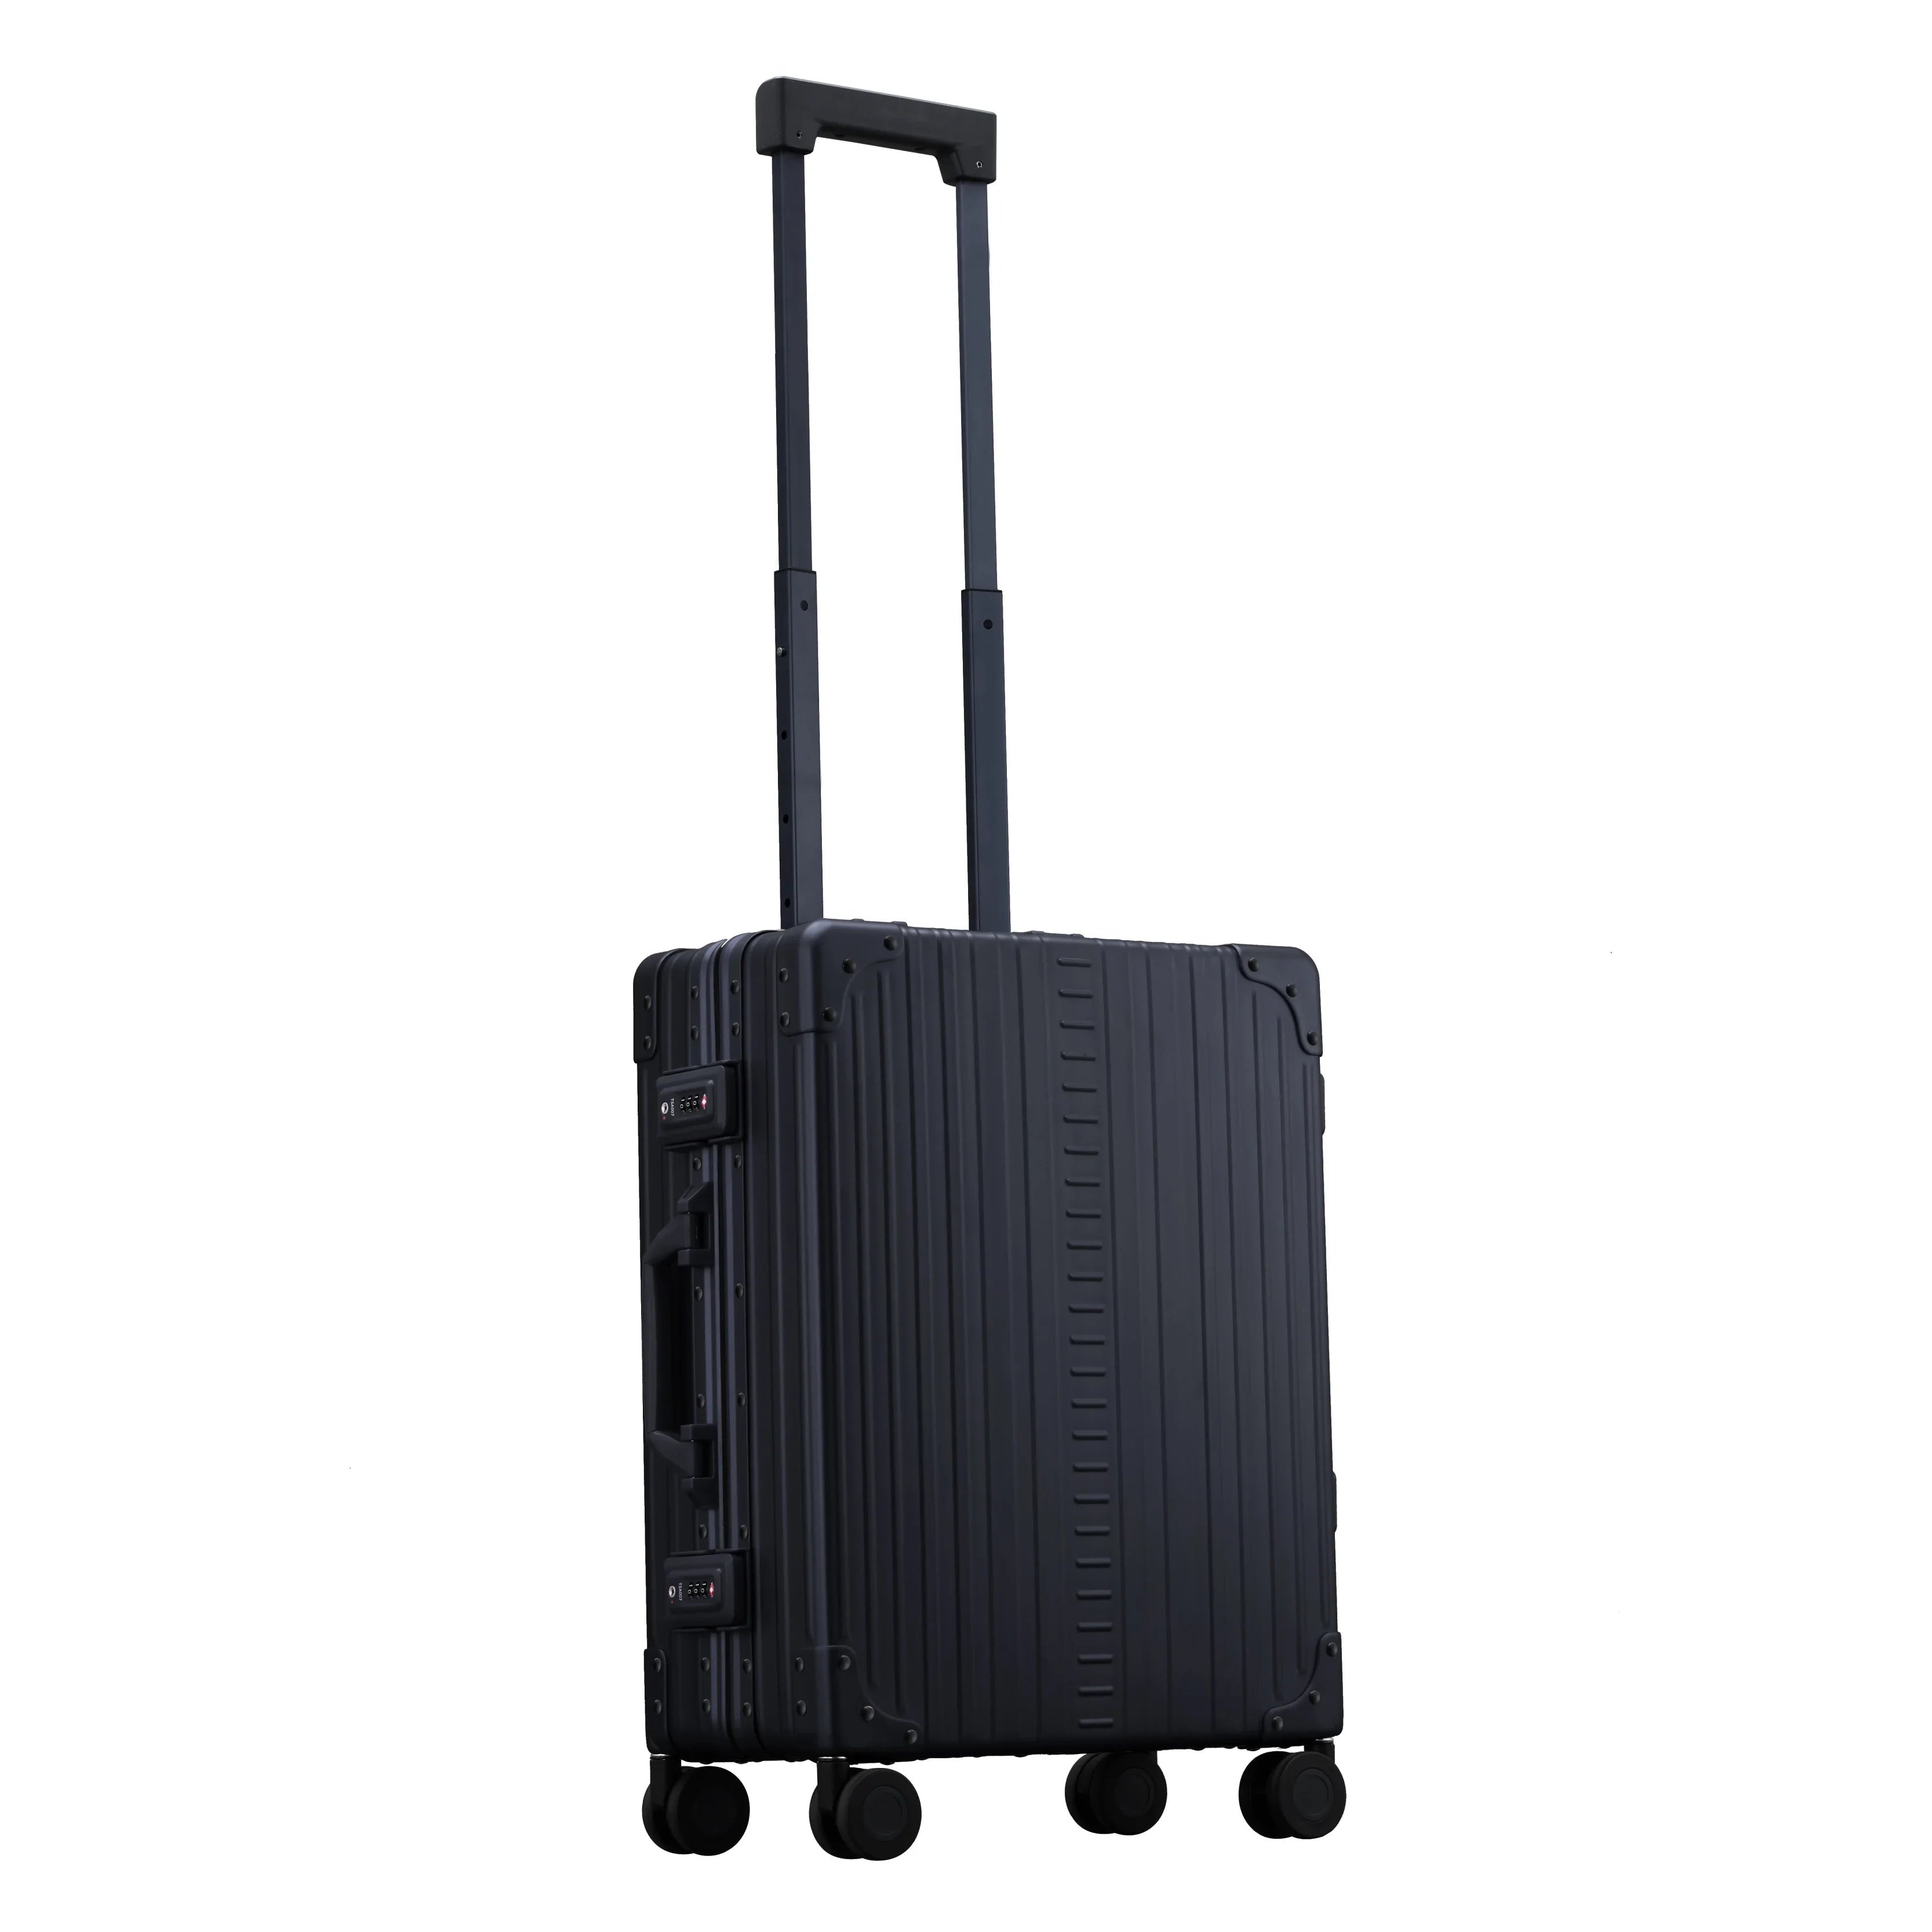 Valise cabine 4 roues Aleon International Carry-On 55 cm - Ruby